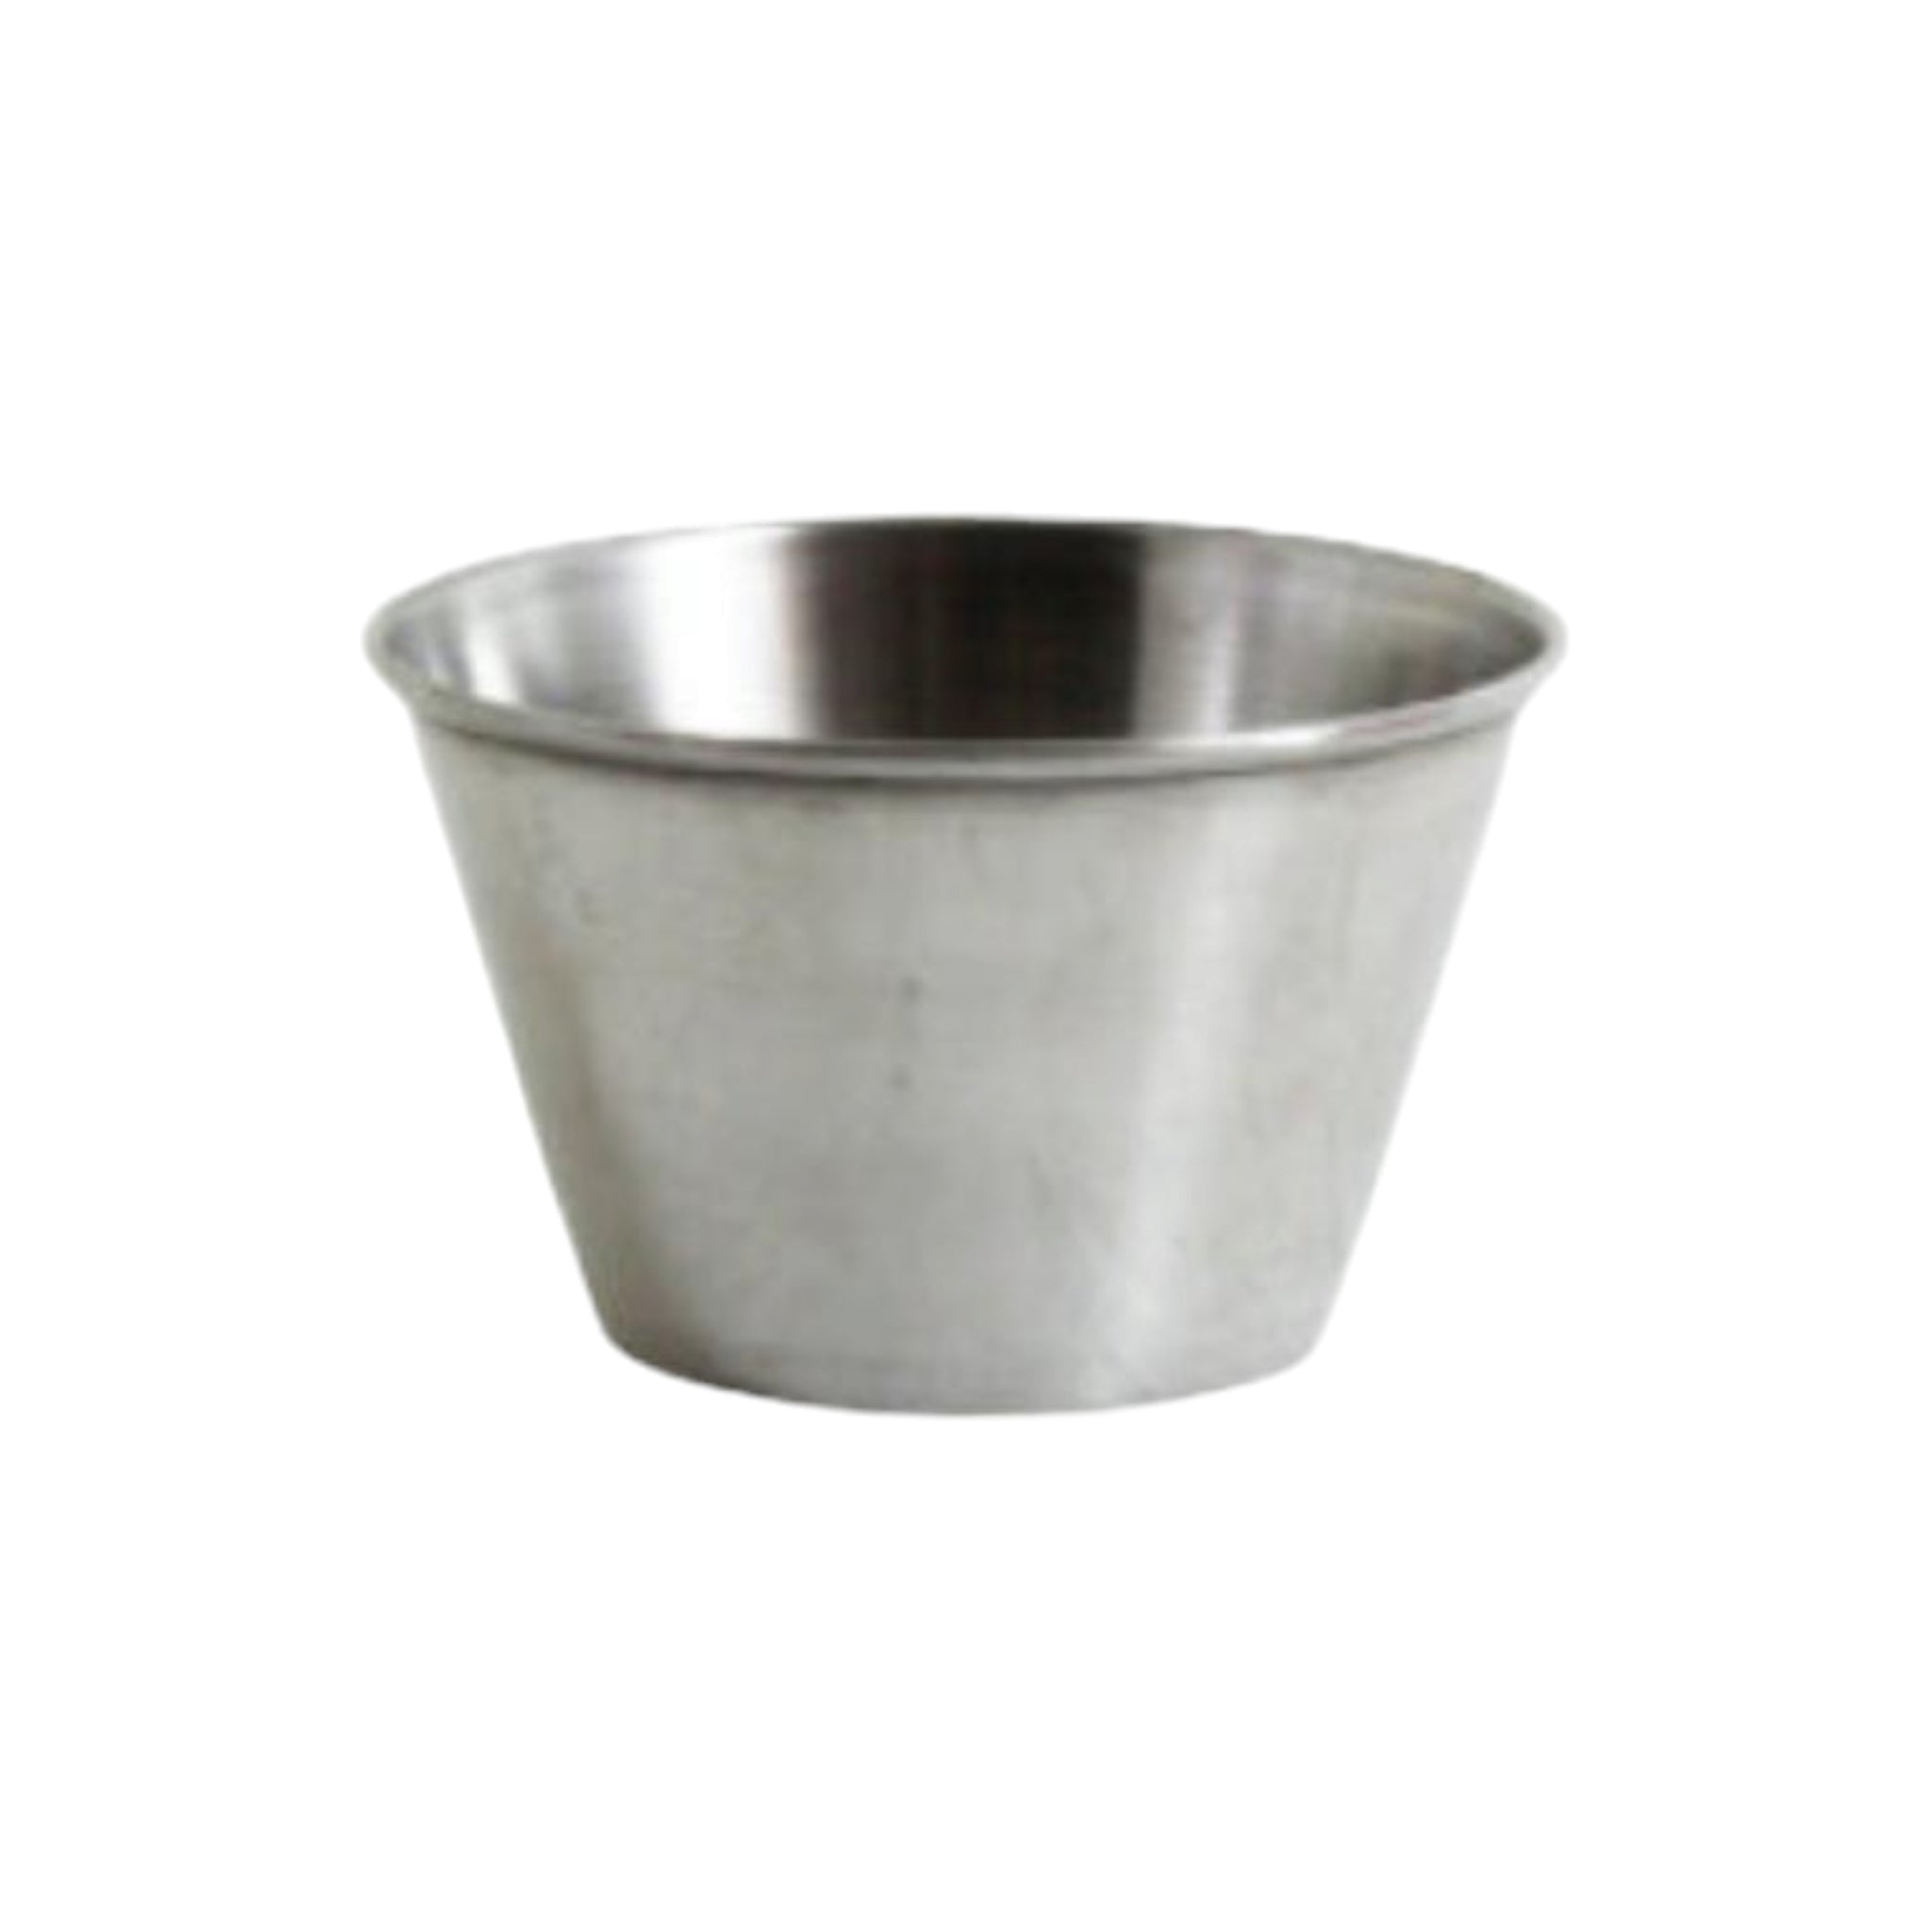 Stainless Steel Sauce Cup 2.5oz-75ml MV1290